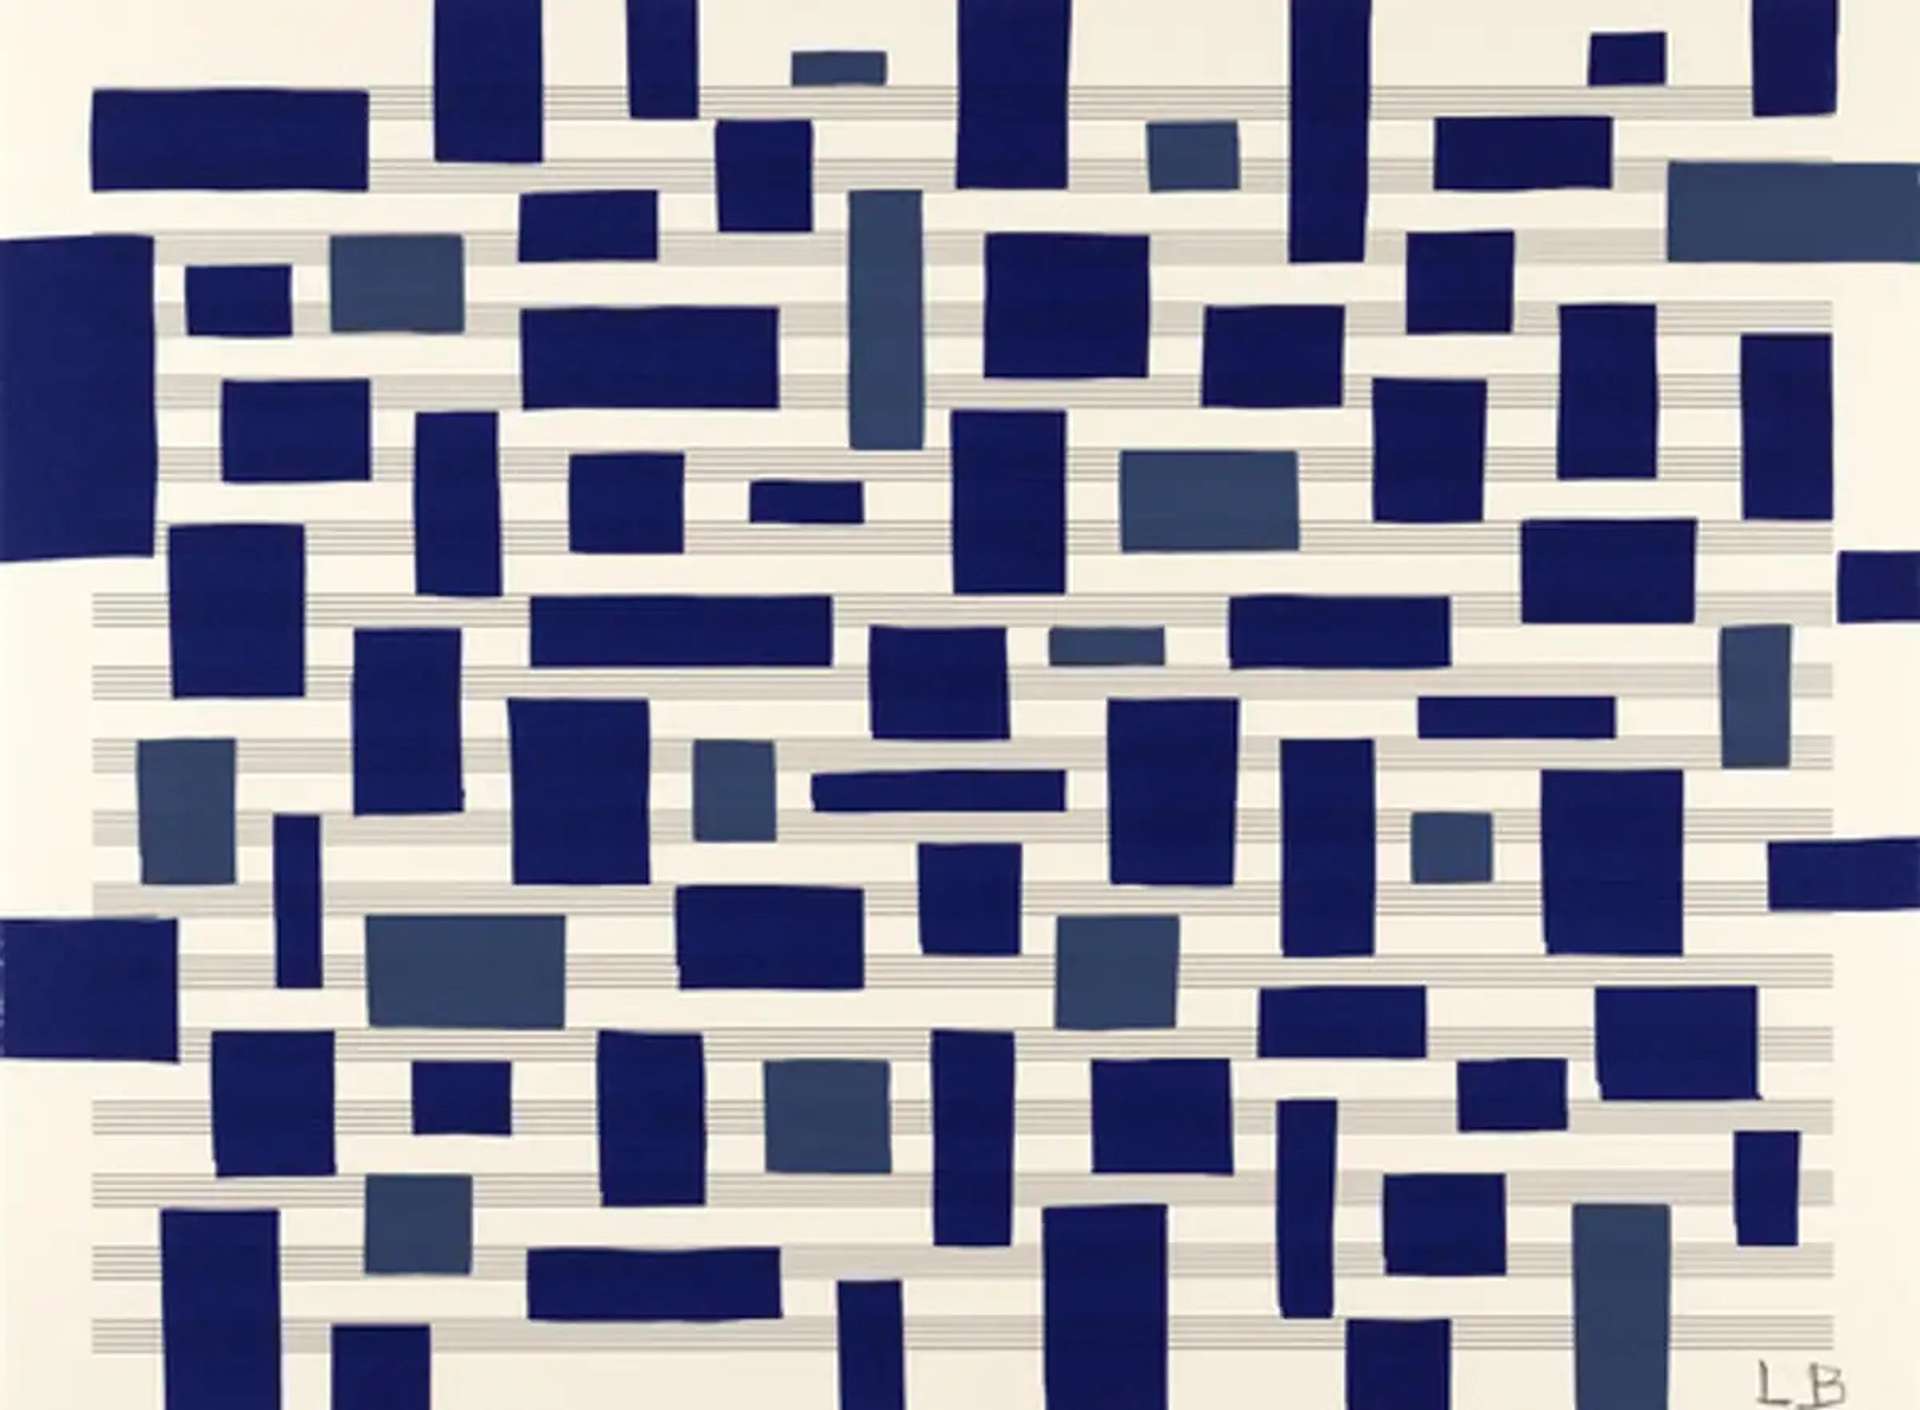 Louise Bourgeois’ Untitled #16. A screenprint of blue rectangles in a pattern against a sheet of horizontal lines.